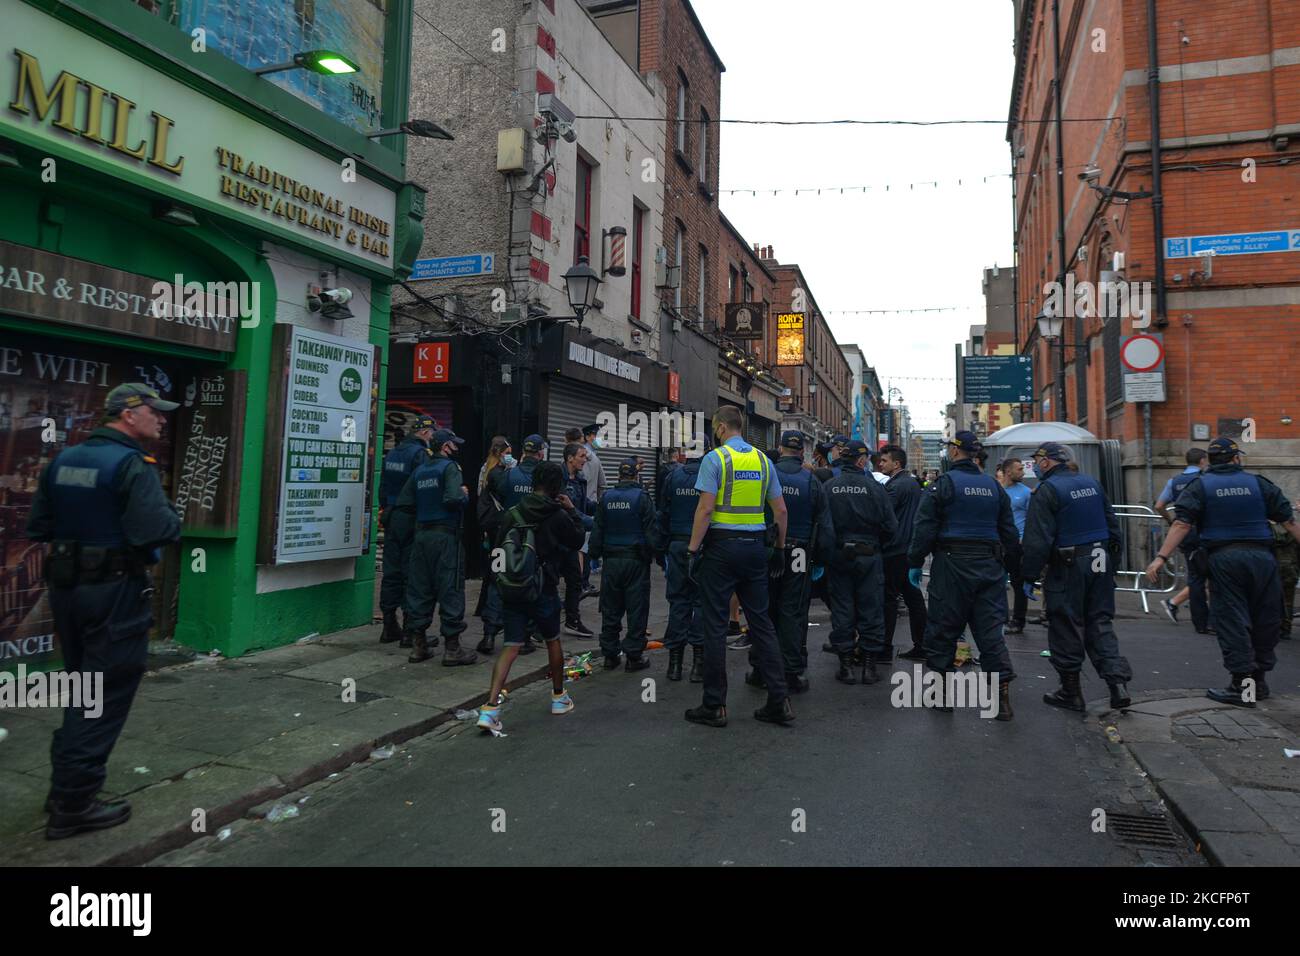 Members of Gardai enforcing coronavirus restrictions and relocating people from Temple Bar in Dublin. On Sunday, 6 June 2021, in Dublin, Ireland. (Photo by Artur Widak/NurPhoto) Stock Photo